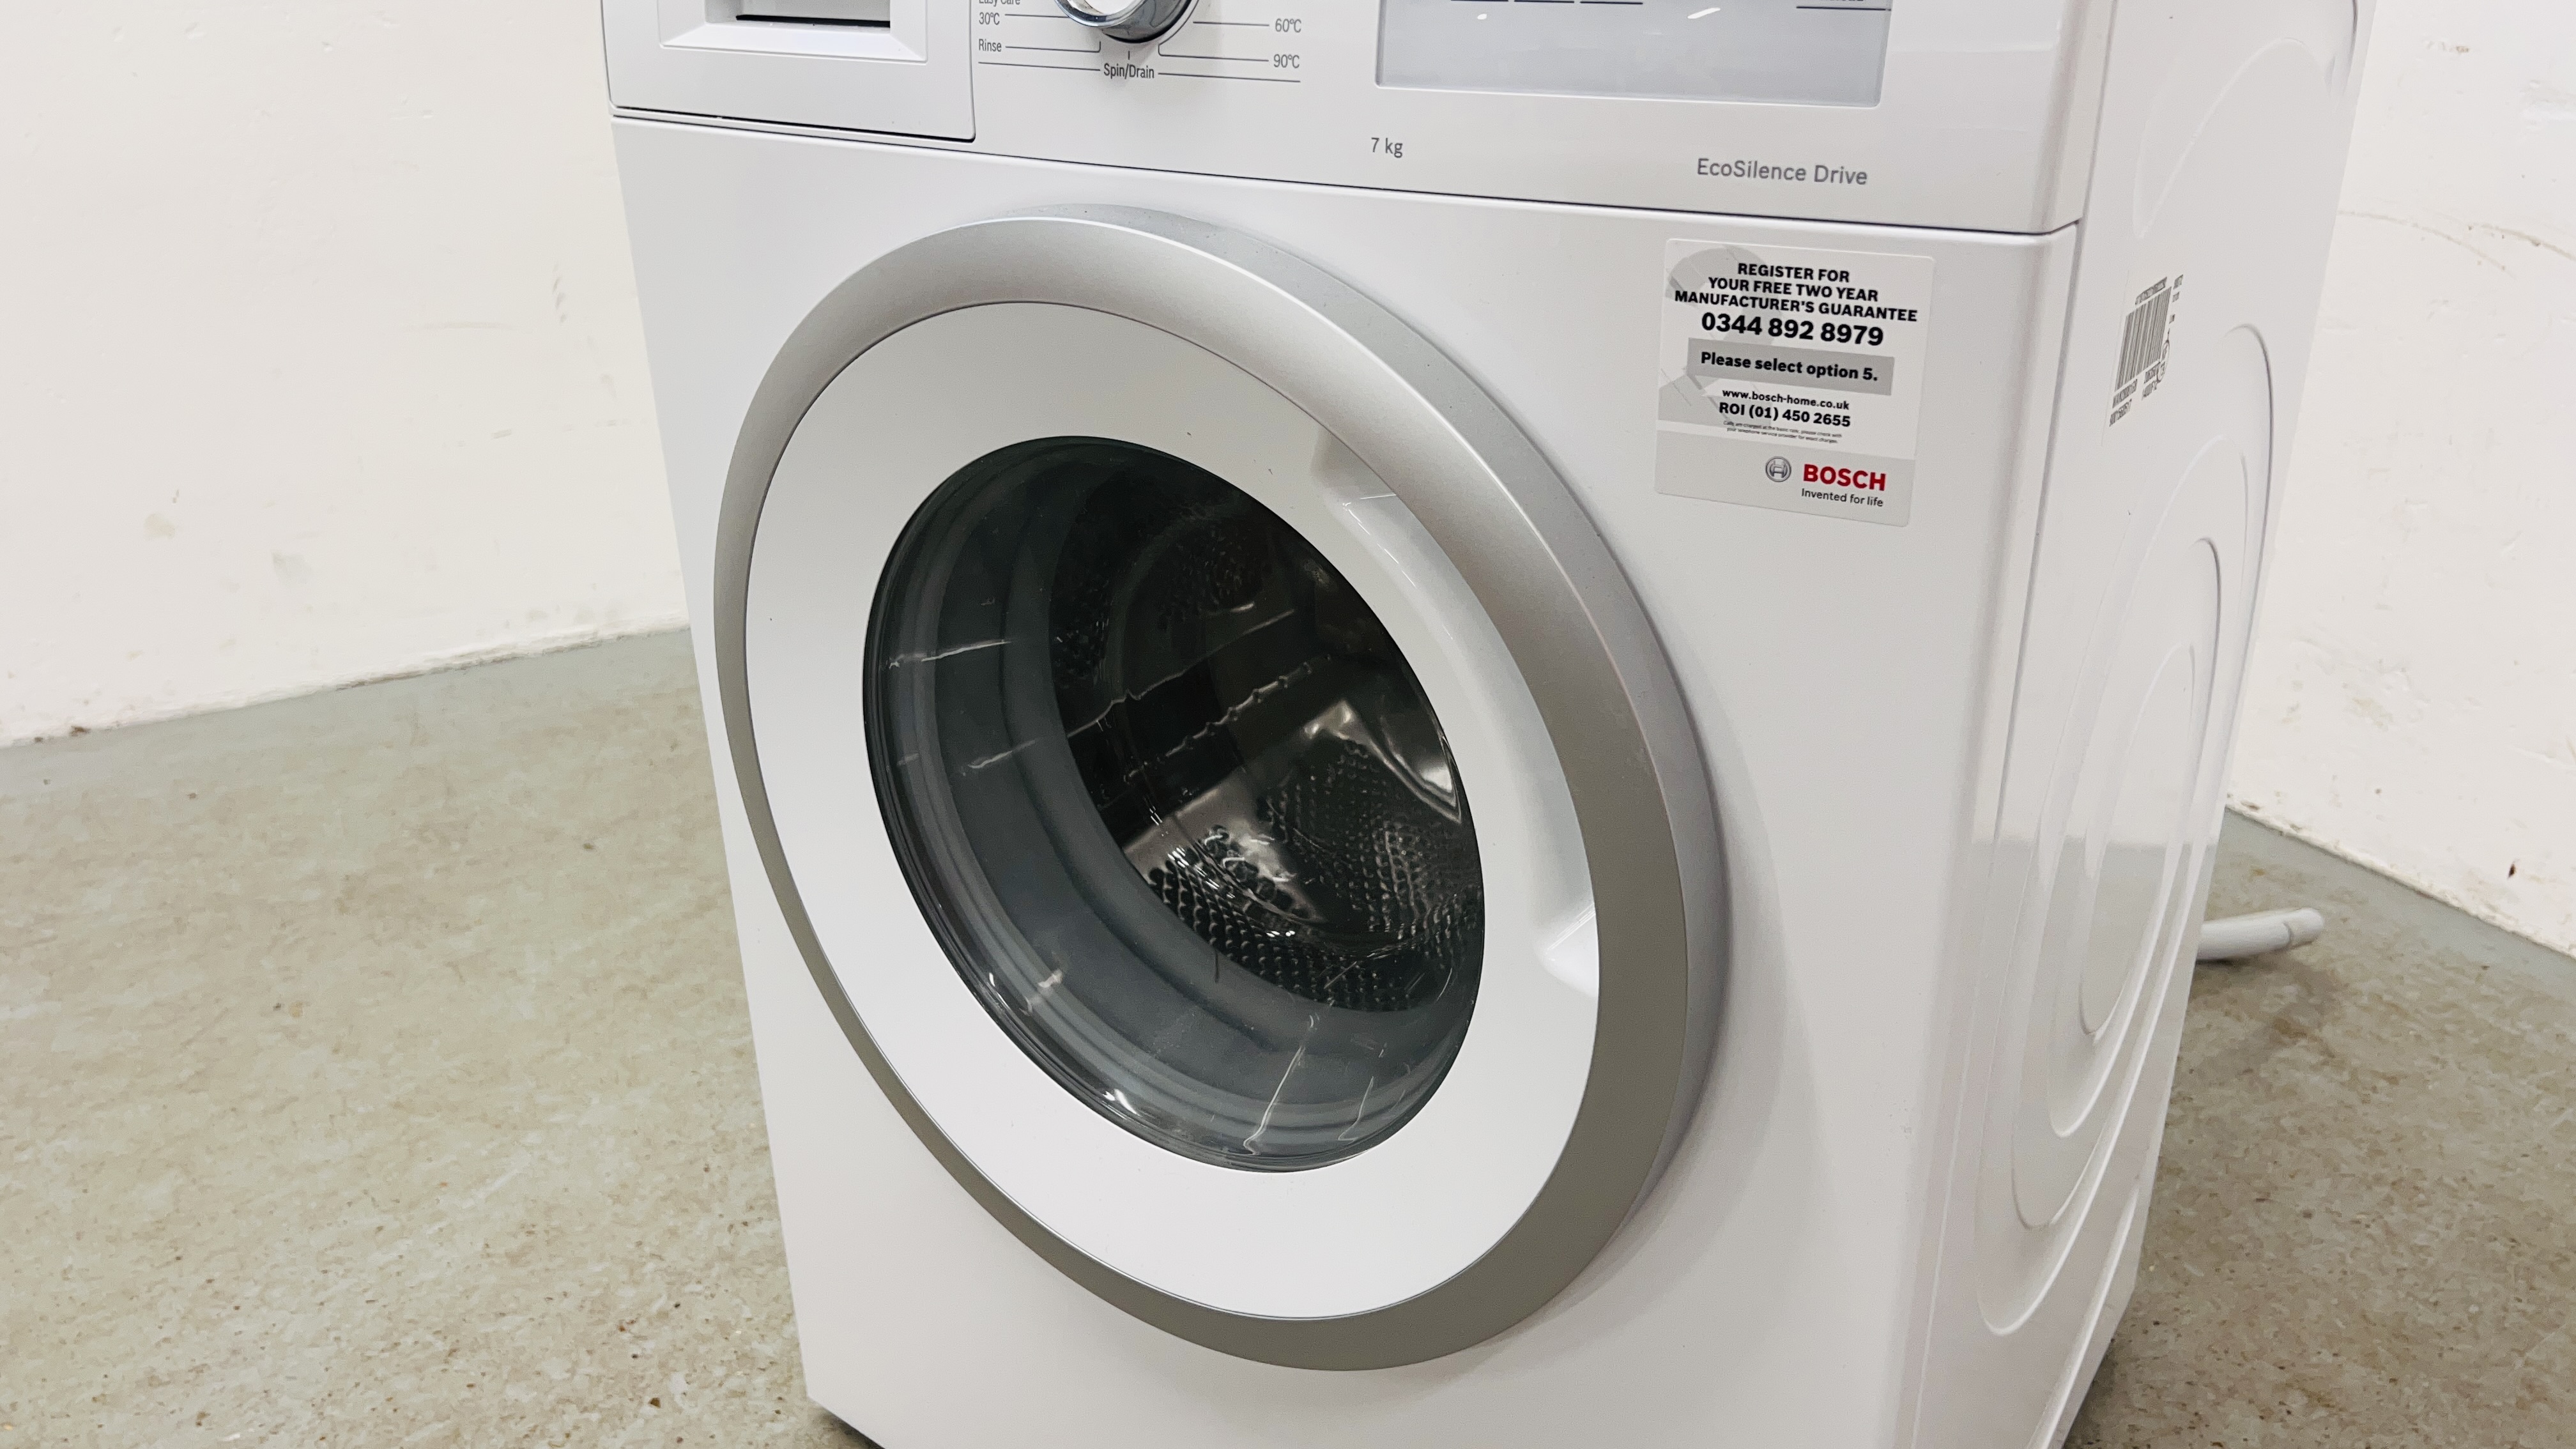 A BOSCH SERIE 4 7KG ECO SILENCE DRIVE WASHING MACHINE - SOLD AS SEEN. - Image 6 of 13